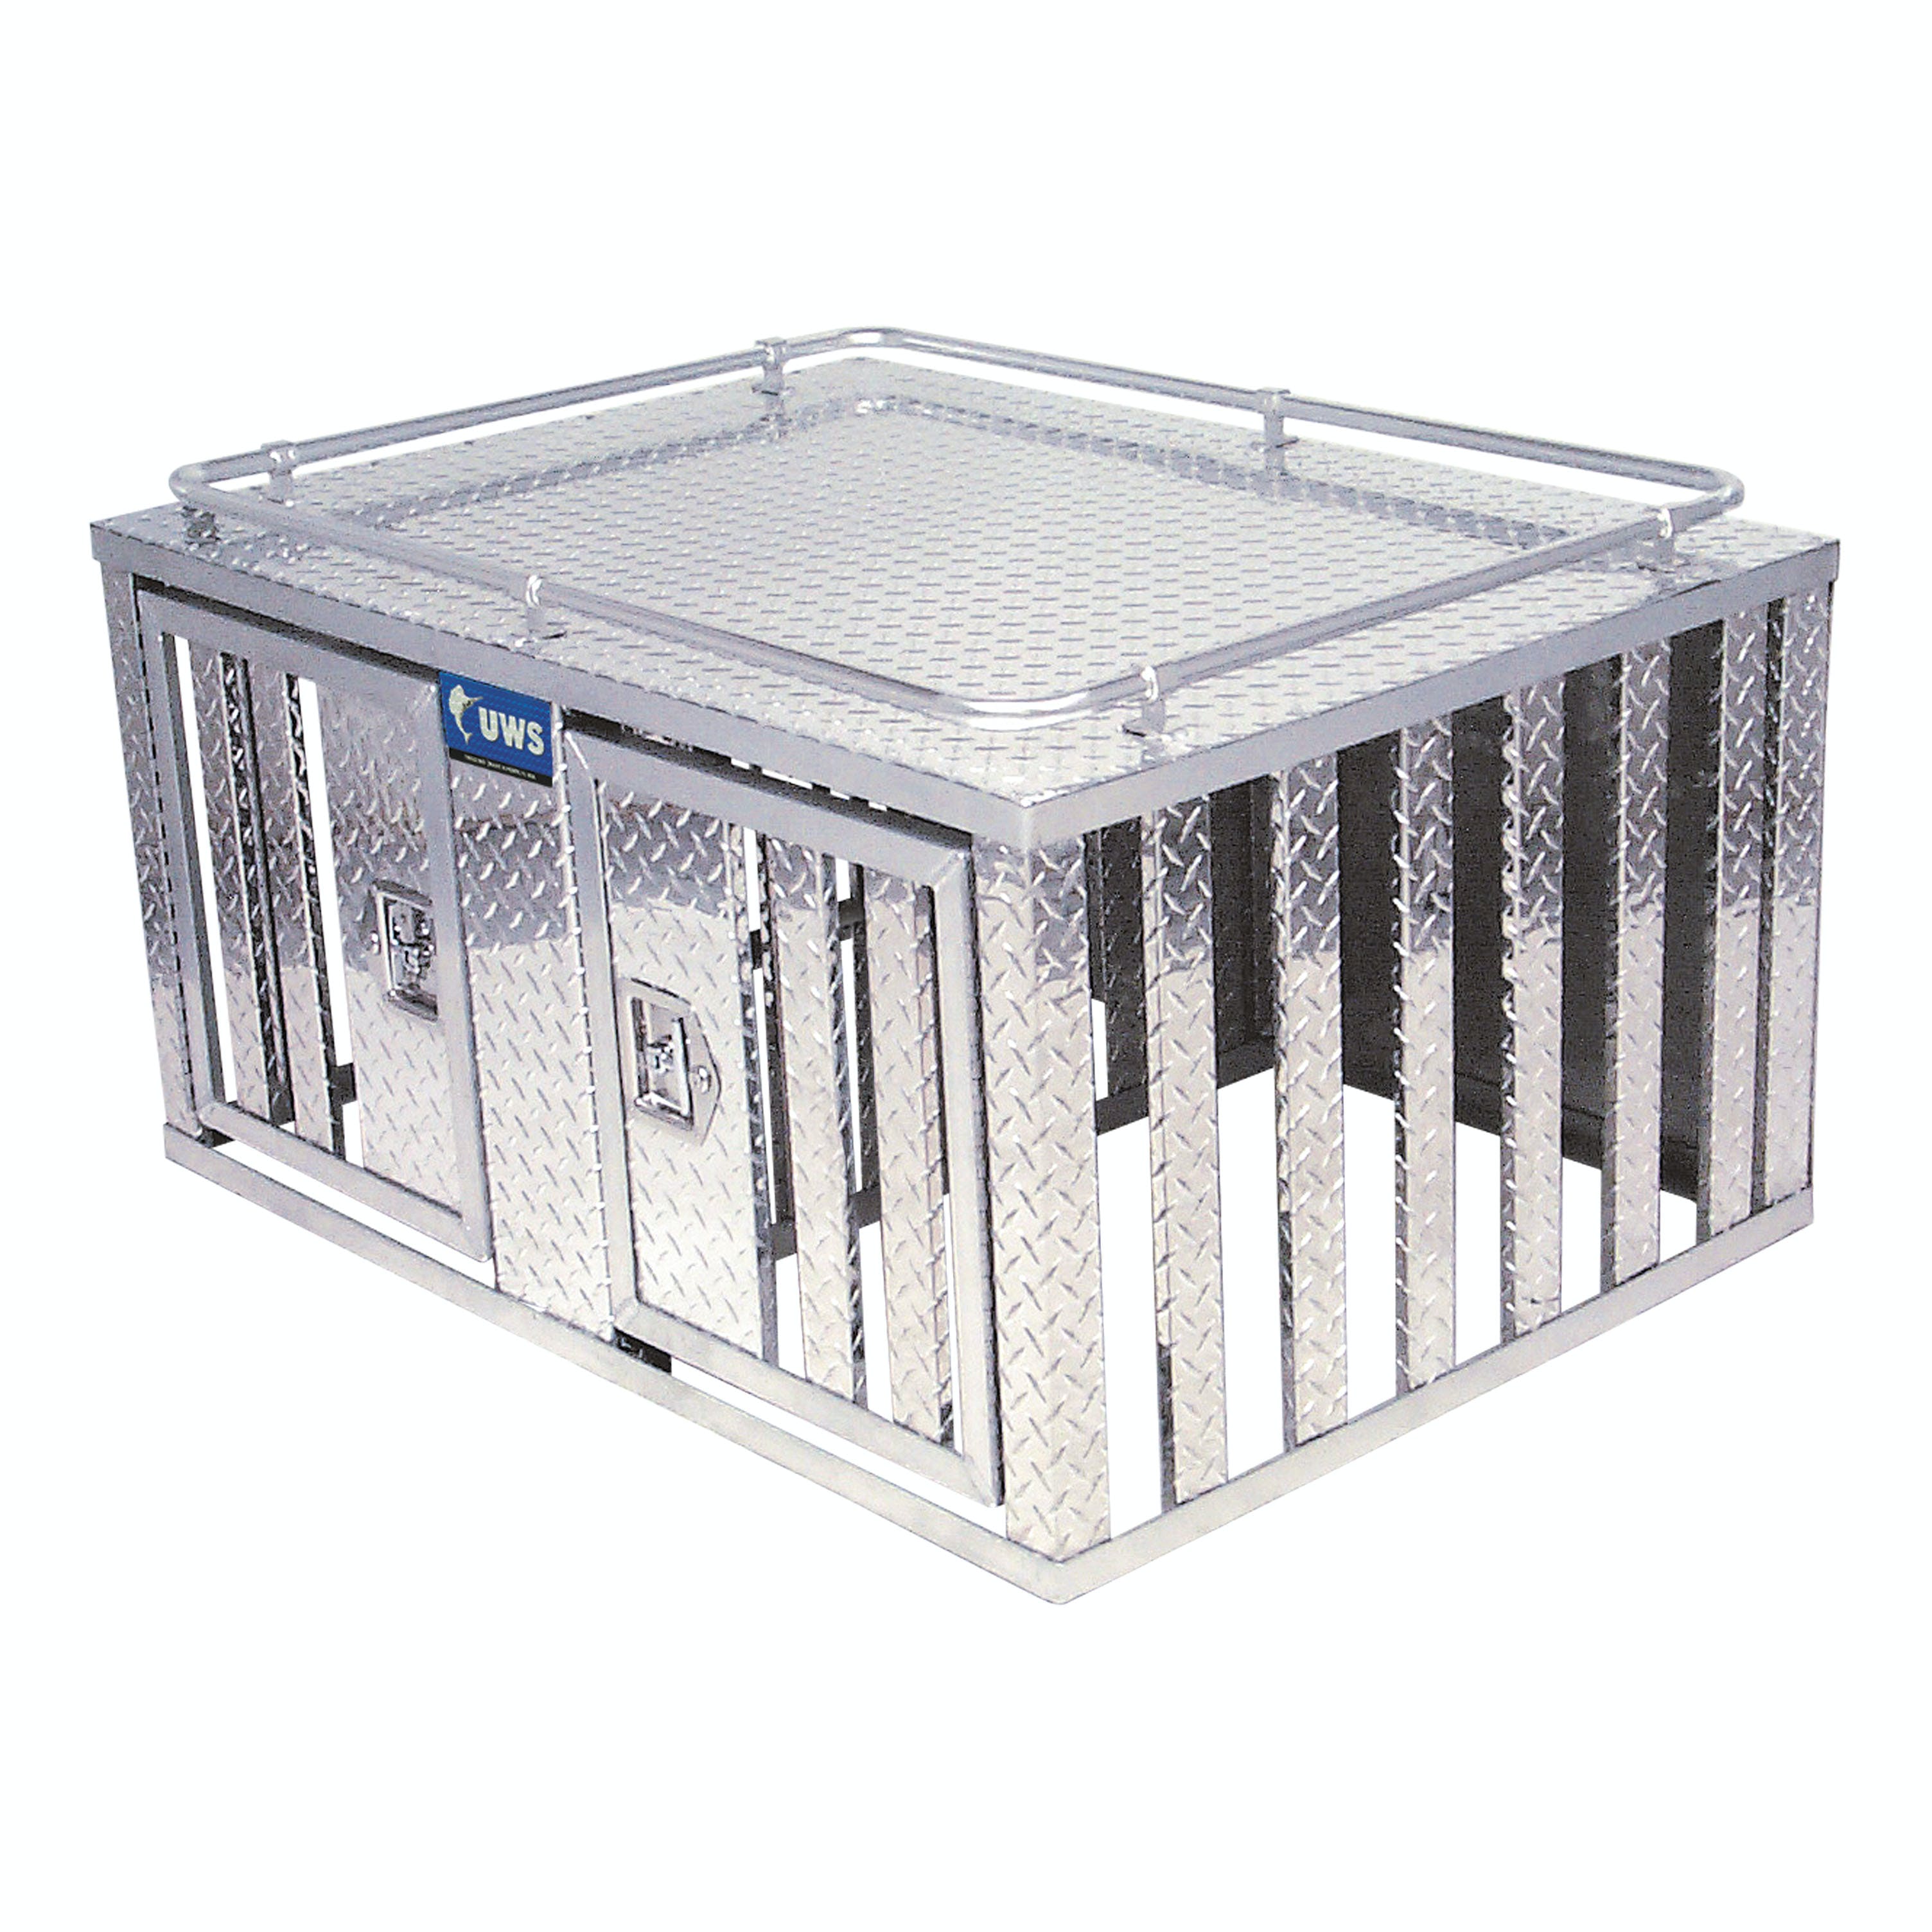 UWS DB-4848 48 inch X 48 inch Aluminum Dog Box Double Door with Divider